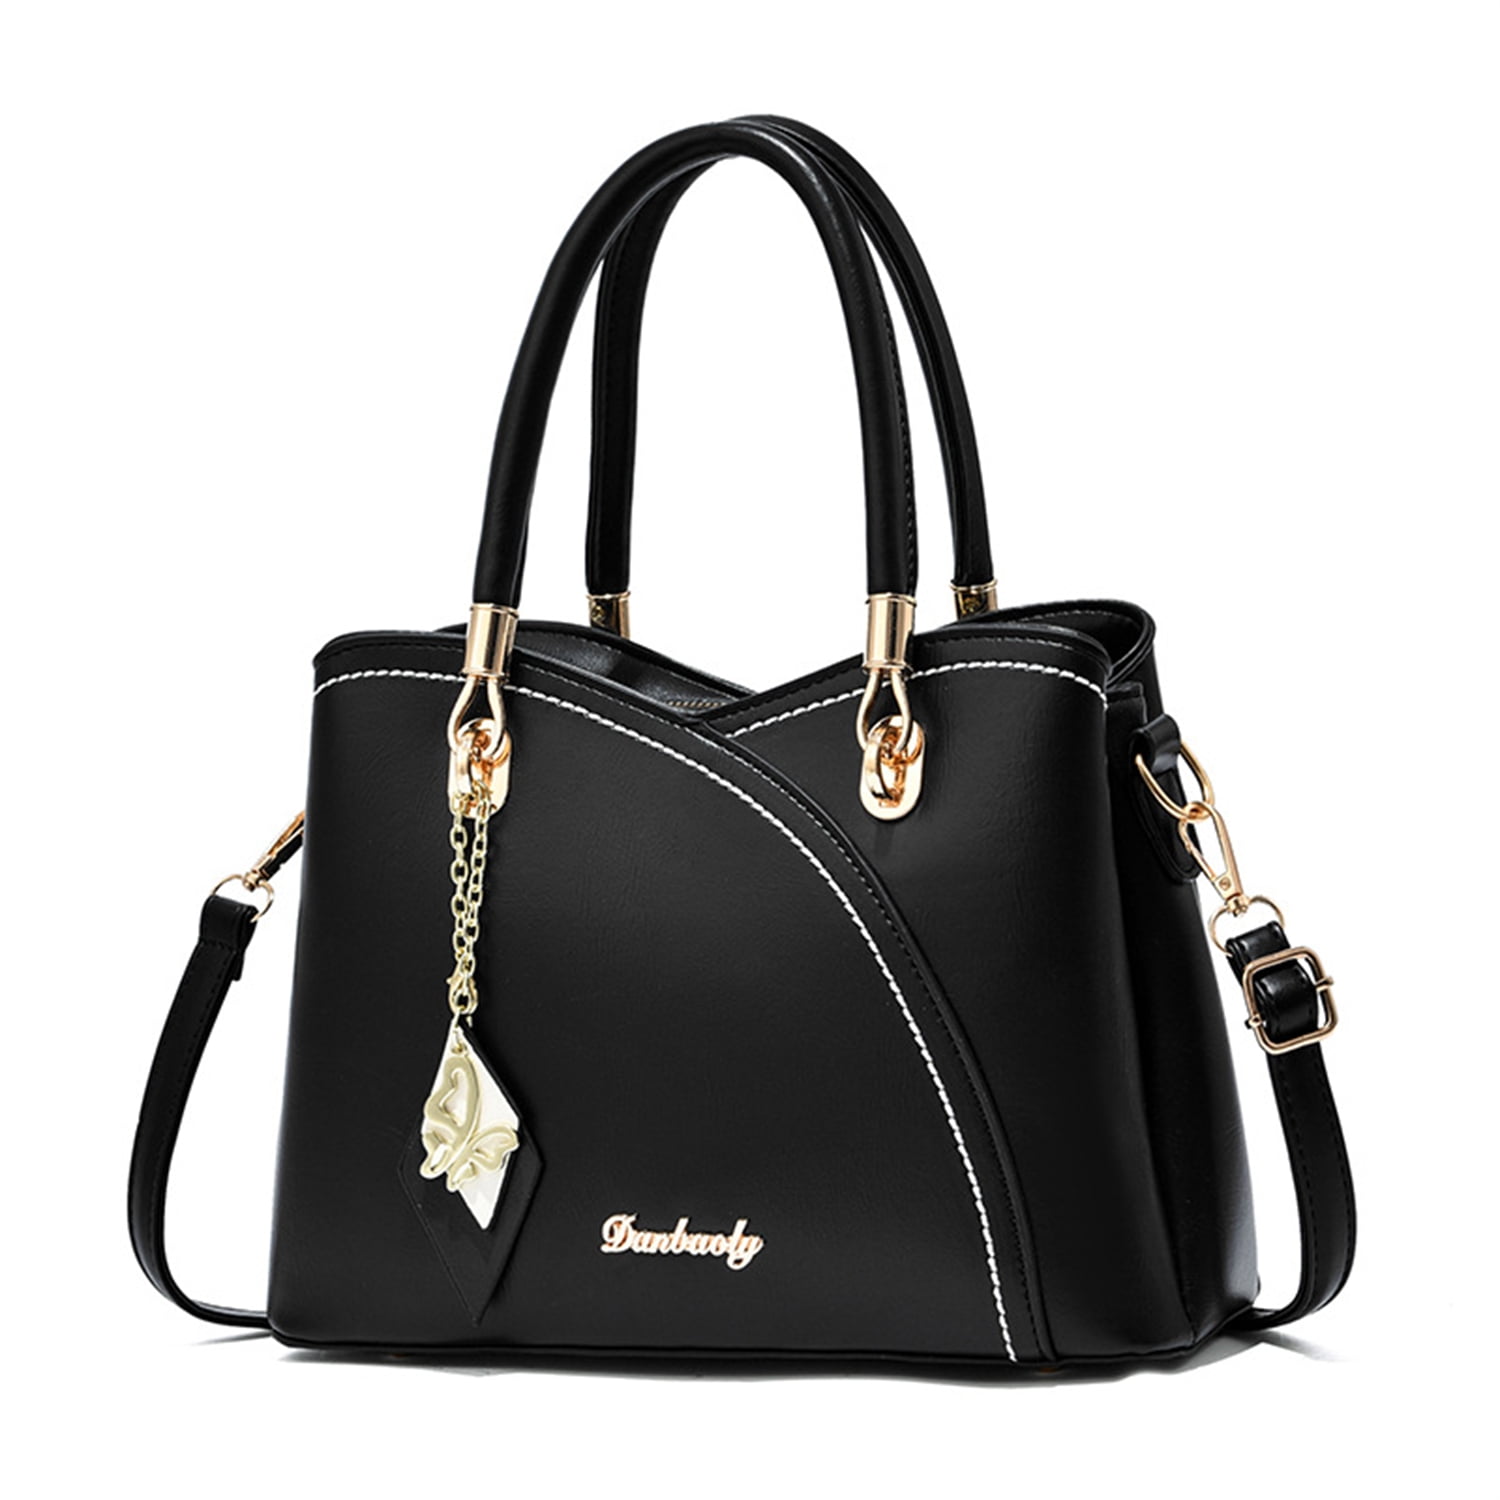 Buy Womens Leather Handbags Purse Top-handle Bags Contrast Color Stitching  Totes Satchel Shoulder Bag for Ladies, Black, 1 at Amazon.in